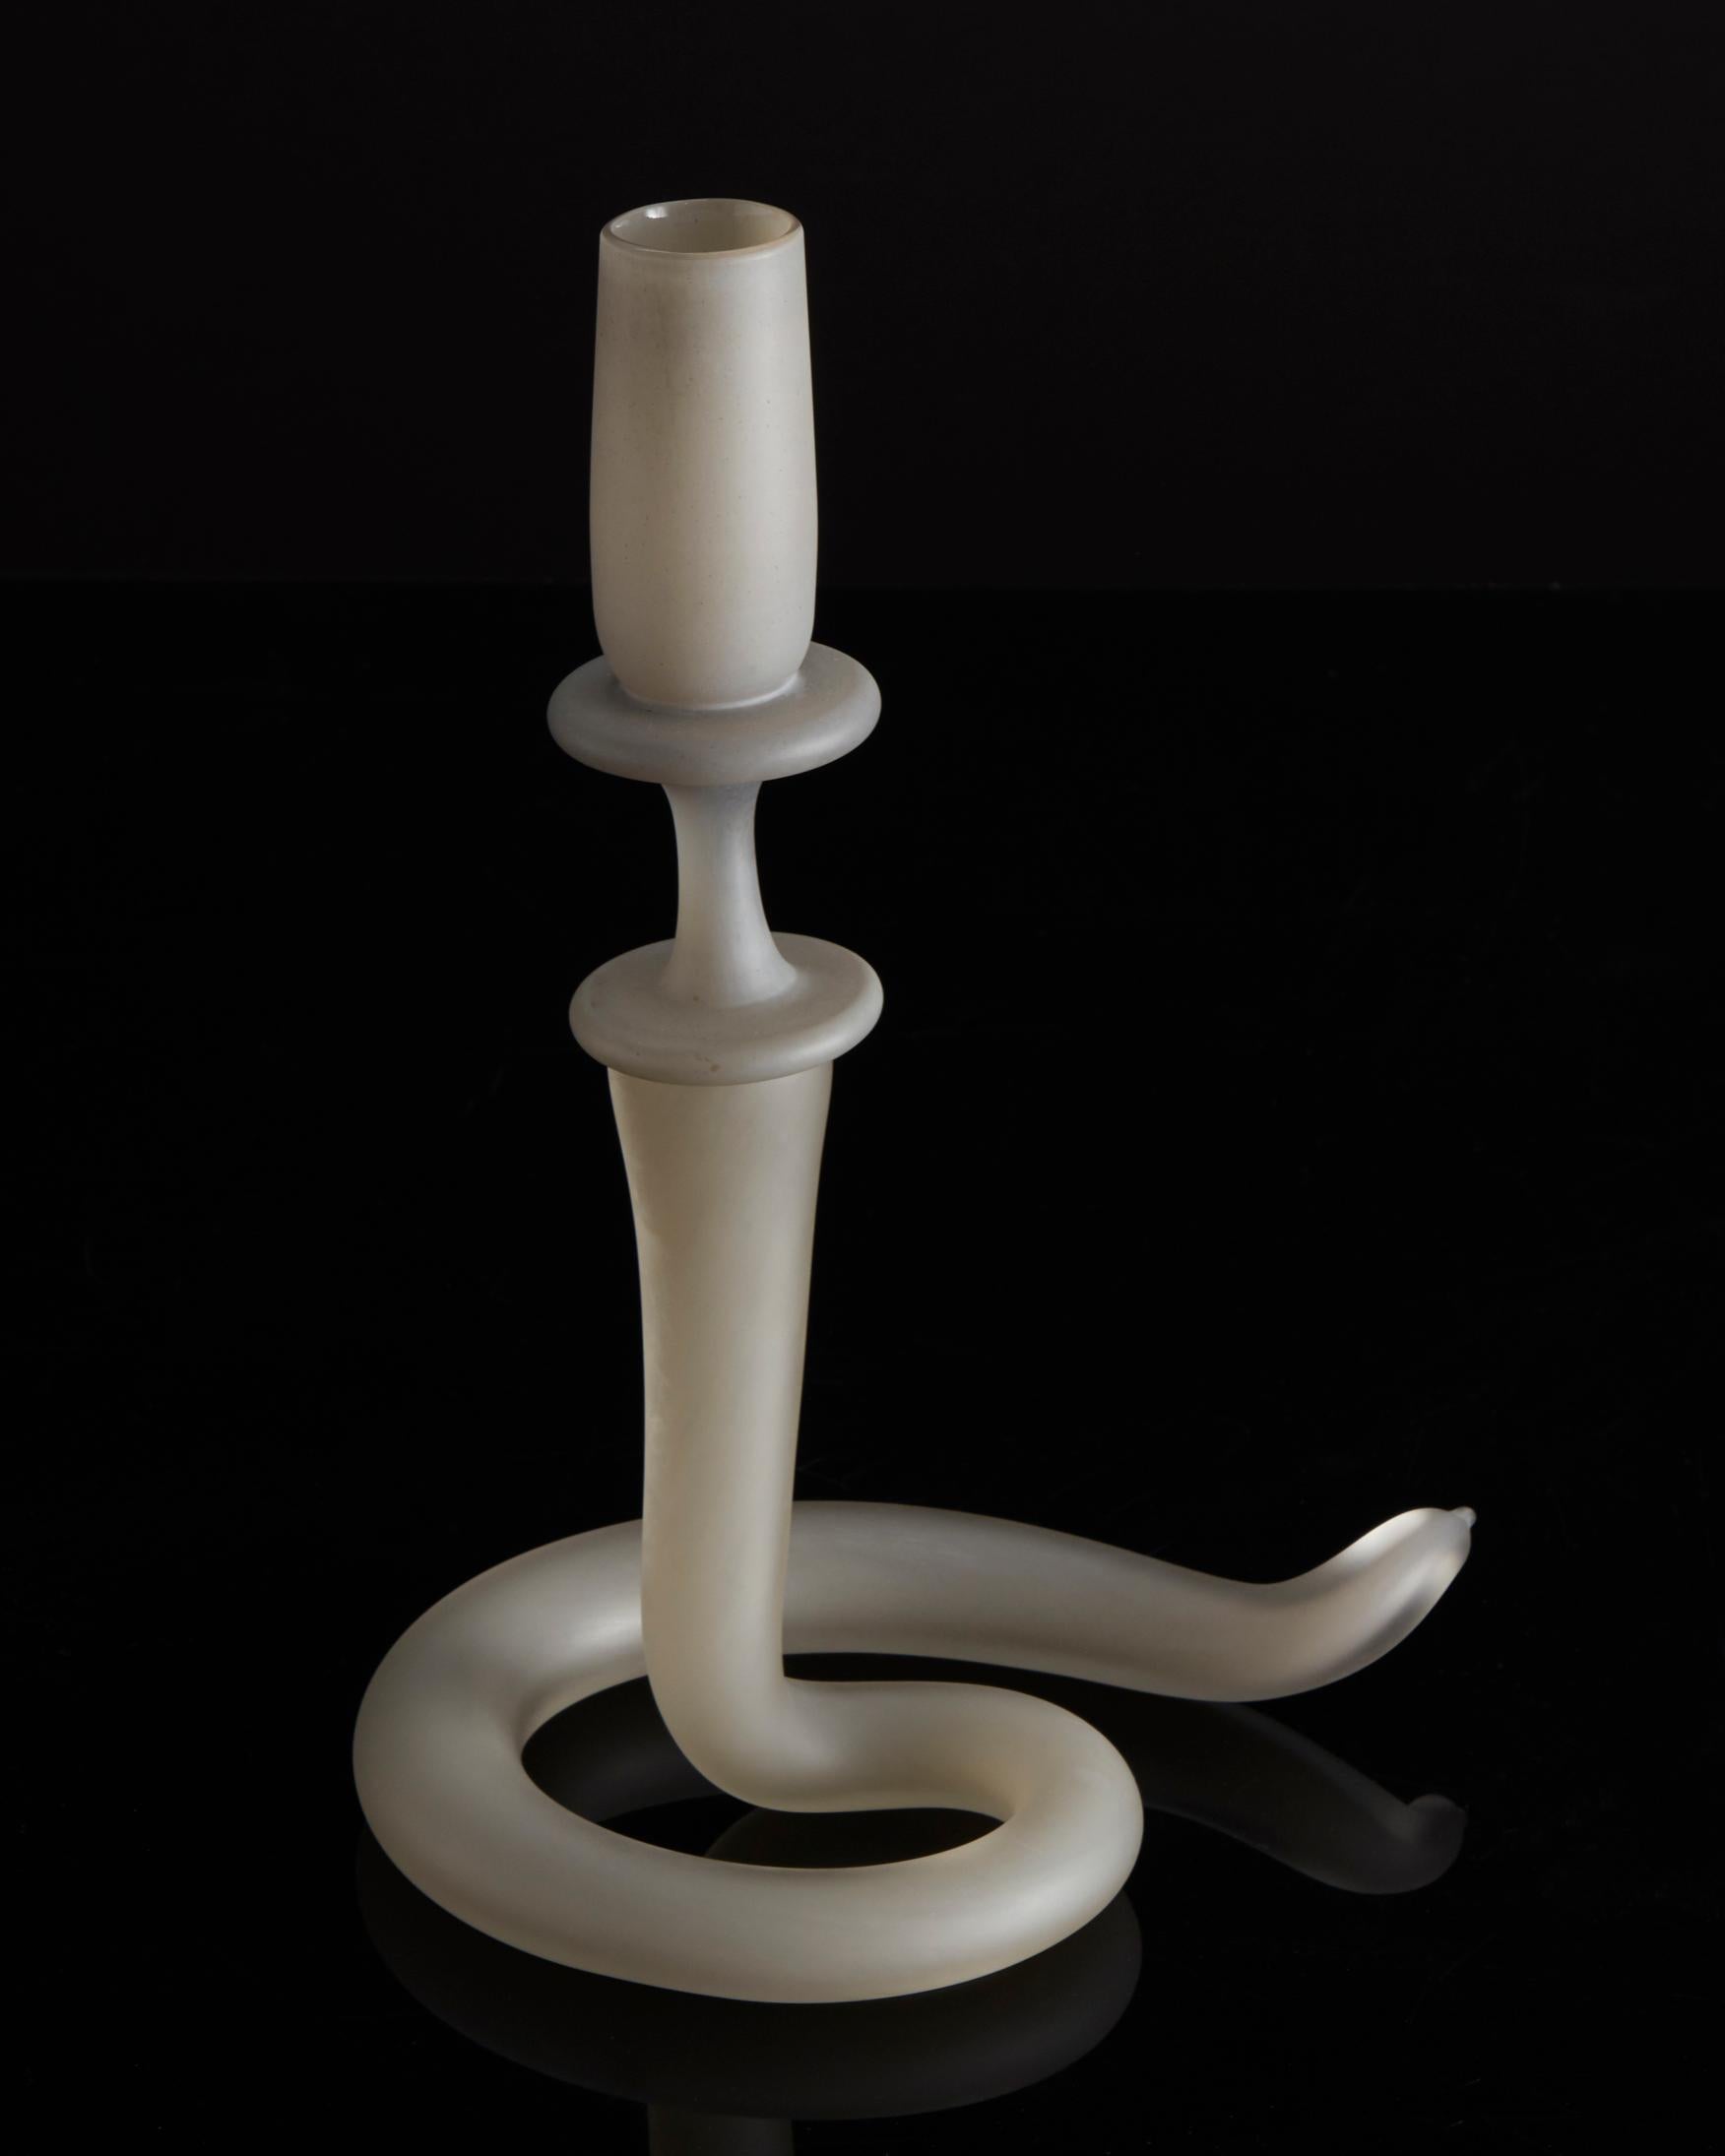 Unique single serpentine light sculpture in matte gray hand blown glass. Designed and made by Jeff Zimmerman, USA, 2017.

Limited number available. Please note that each item may differ slightly in color and shape.